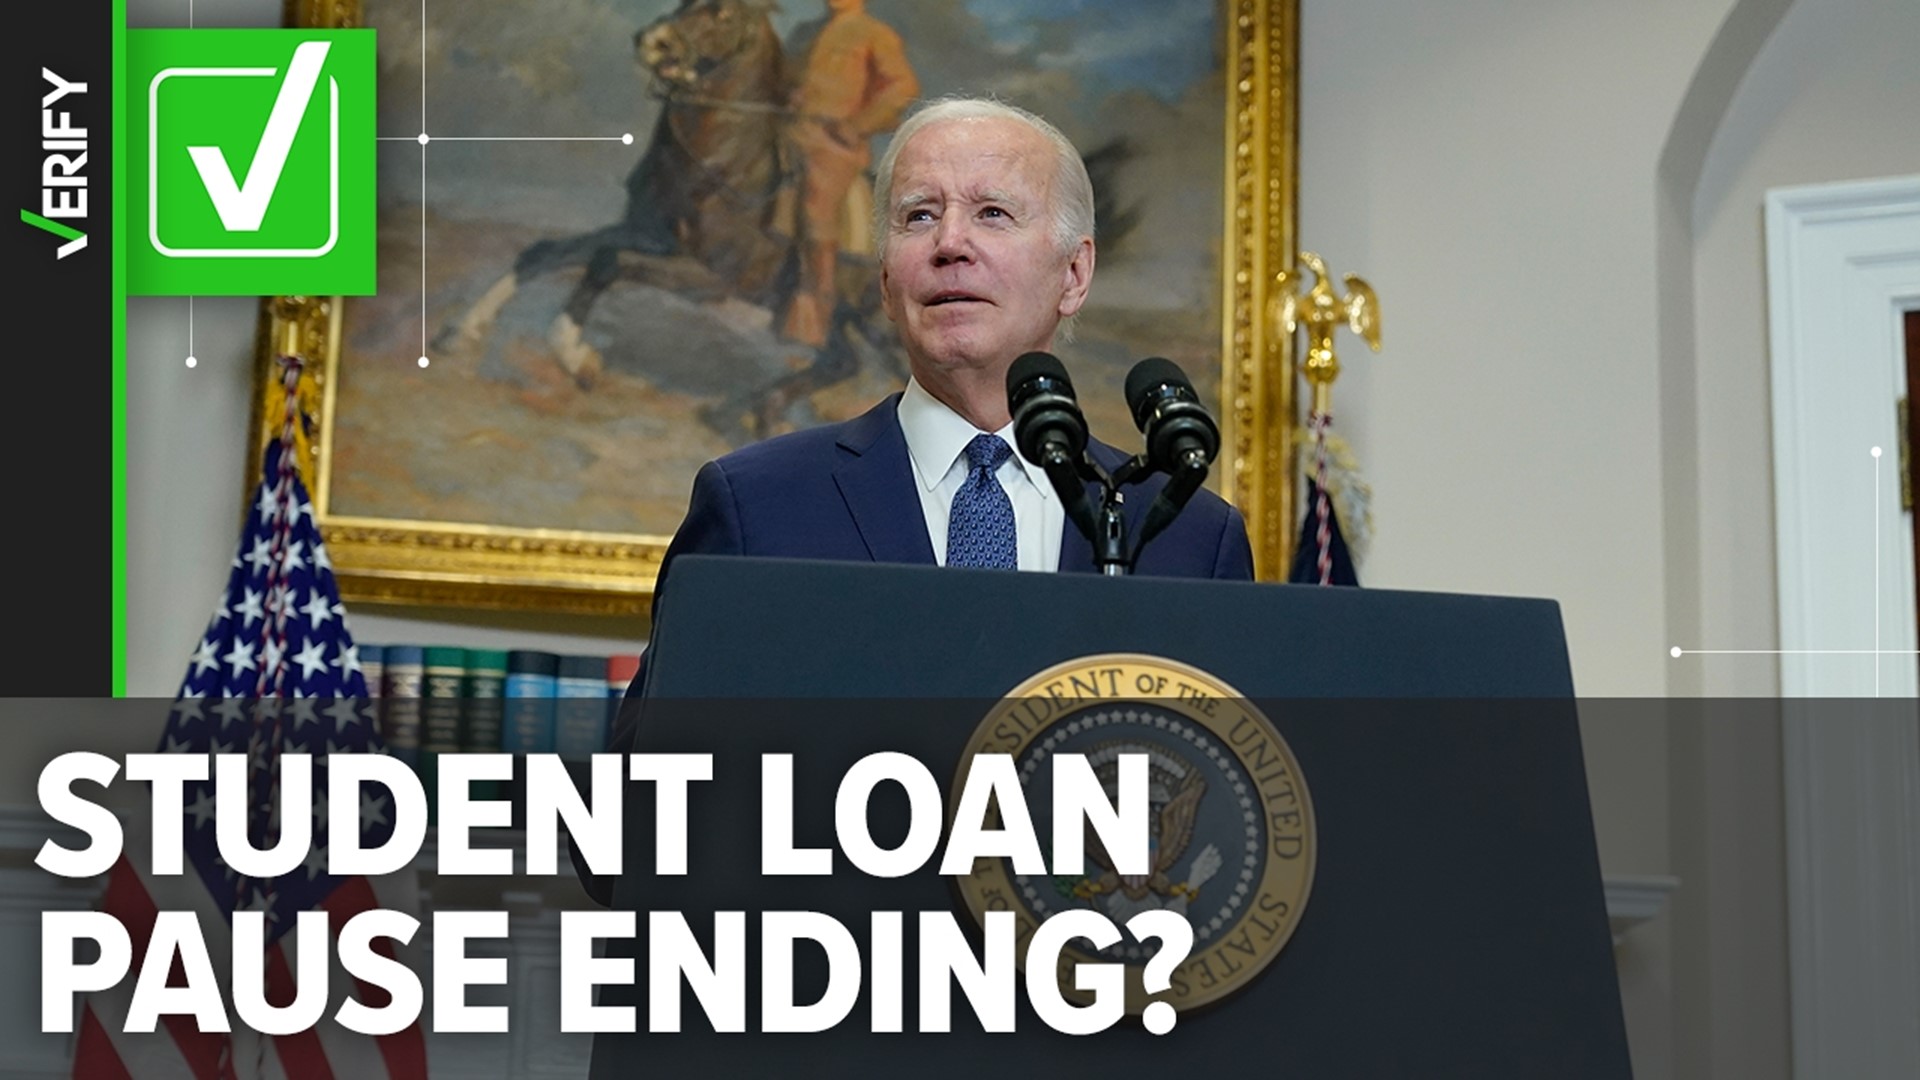 Several VERIFY readers asked what the proposed debt ceiling deal means for their student loan payments. Here’s what borrowers need to know.